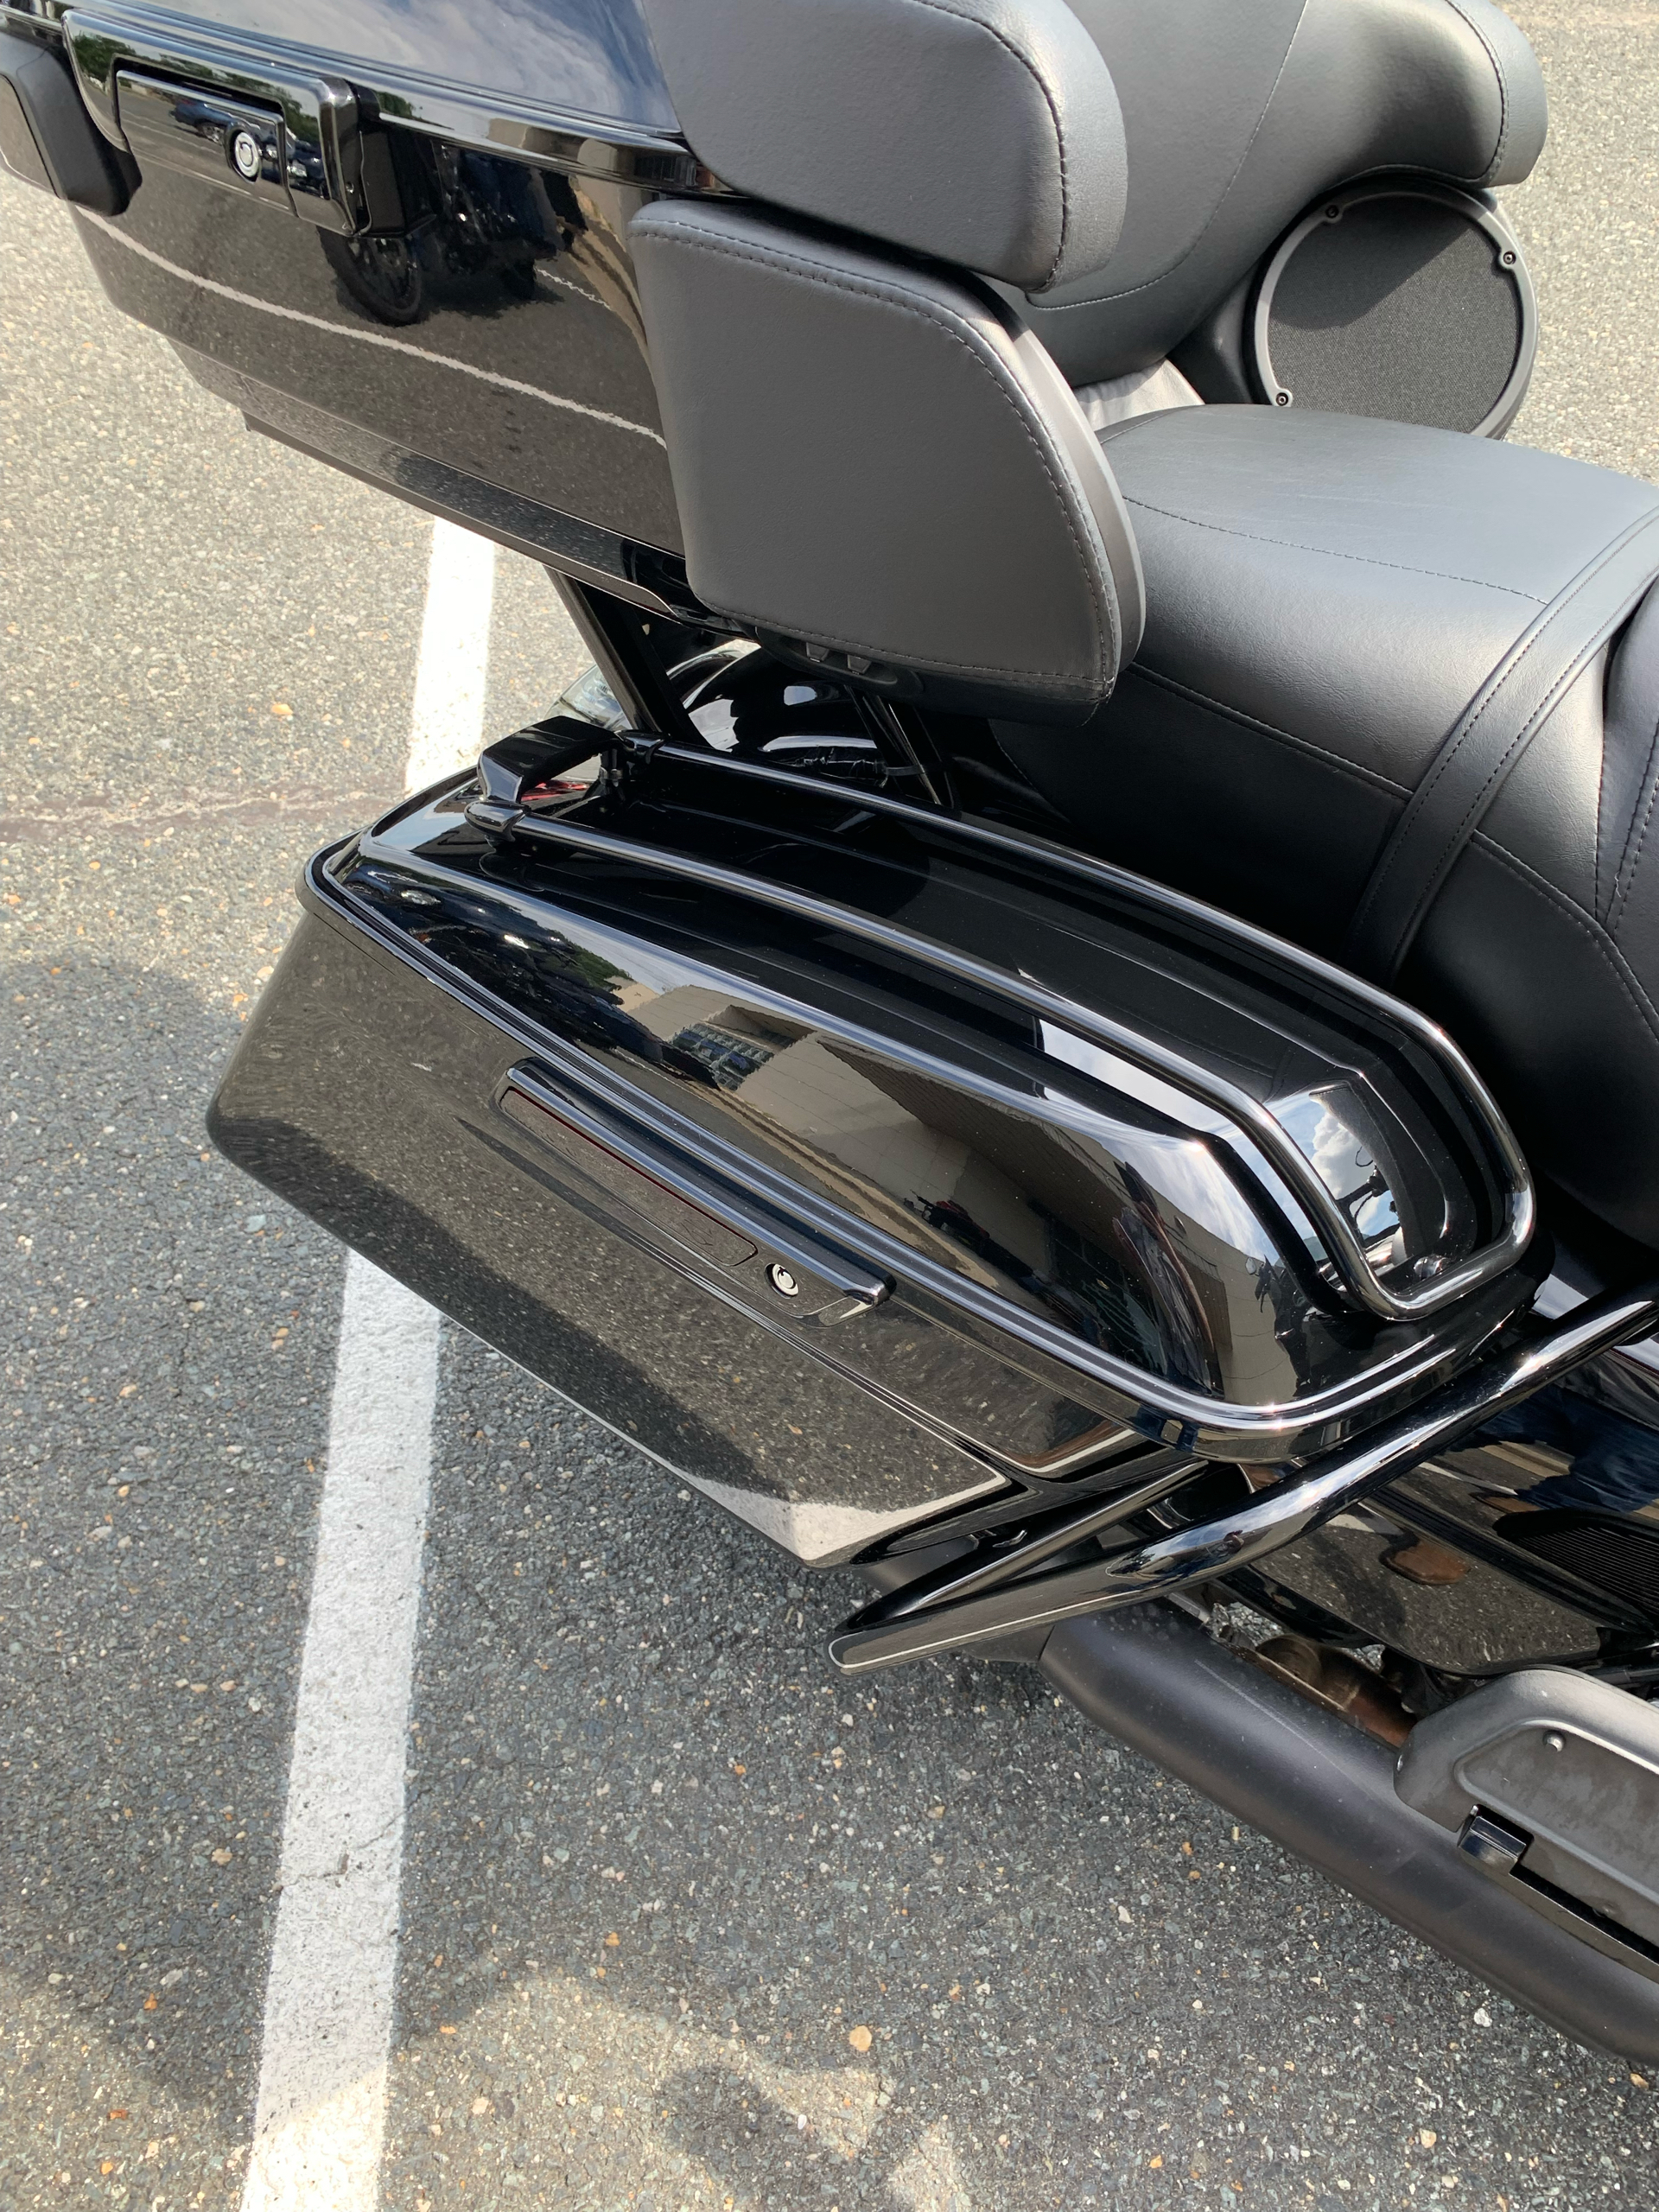 2021 Harley-Davidson ROAD GLIDE LIMITED in Dumfries, Virginia - Photo 4